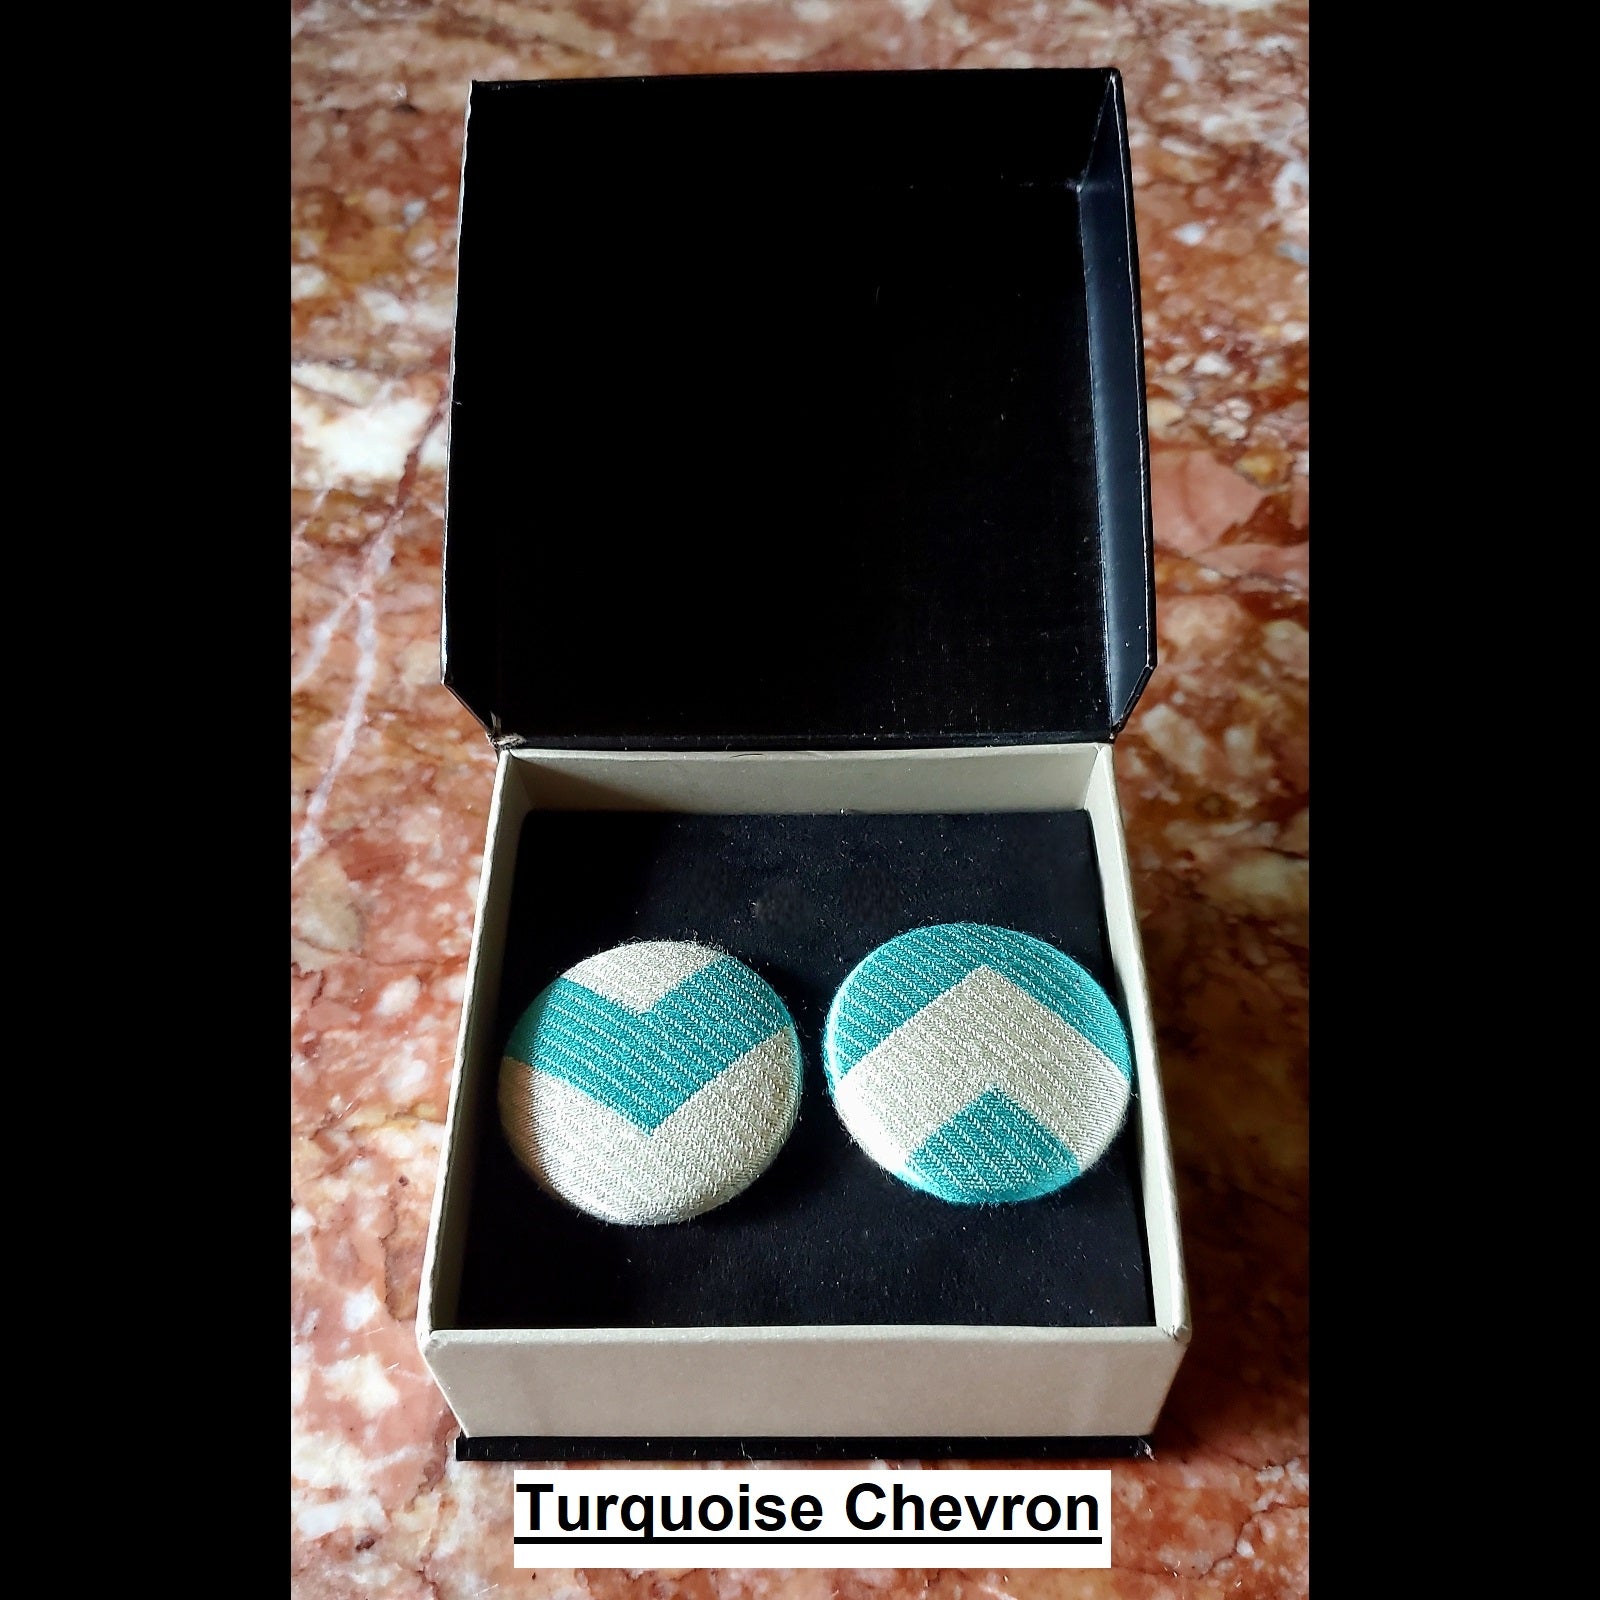 Turquoise and white chevron print button earrings in jewelry box